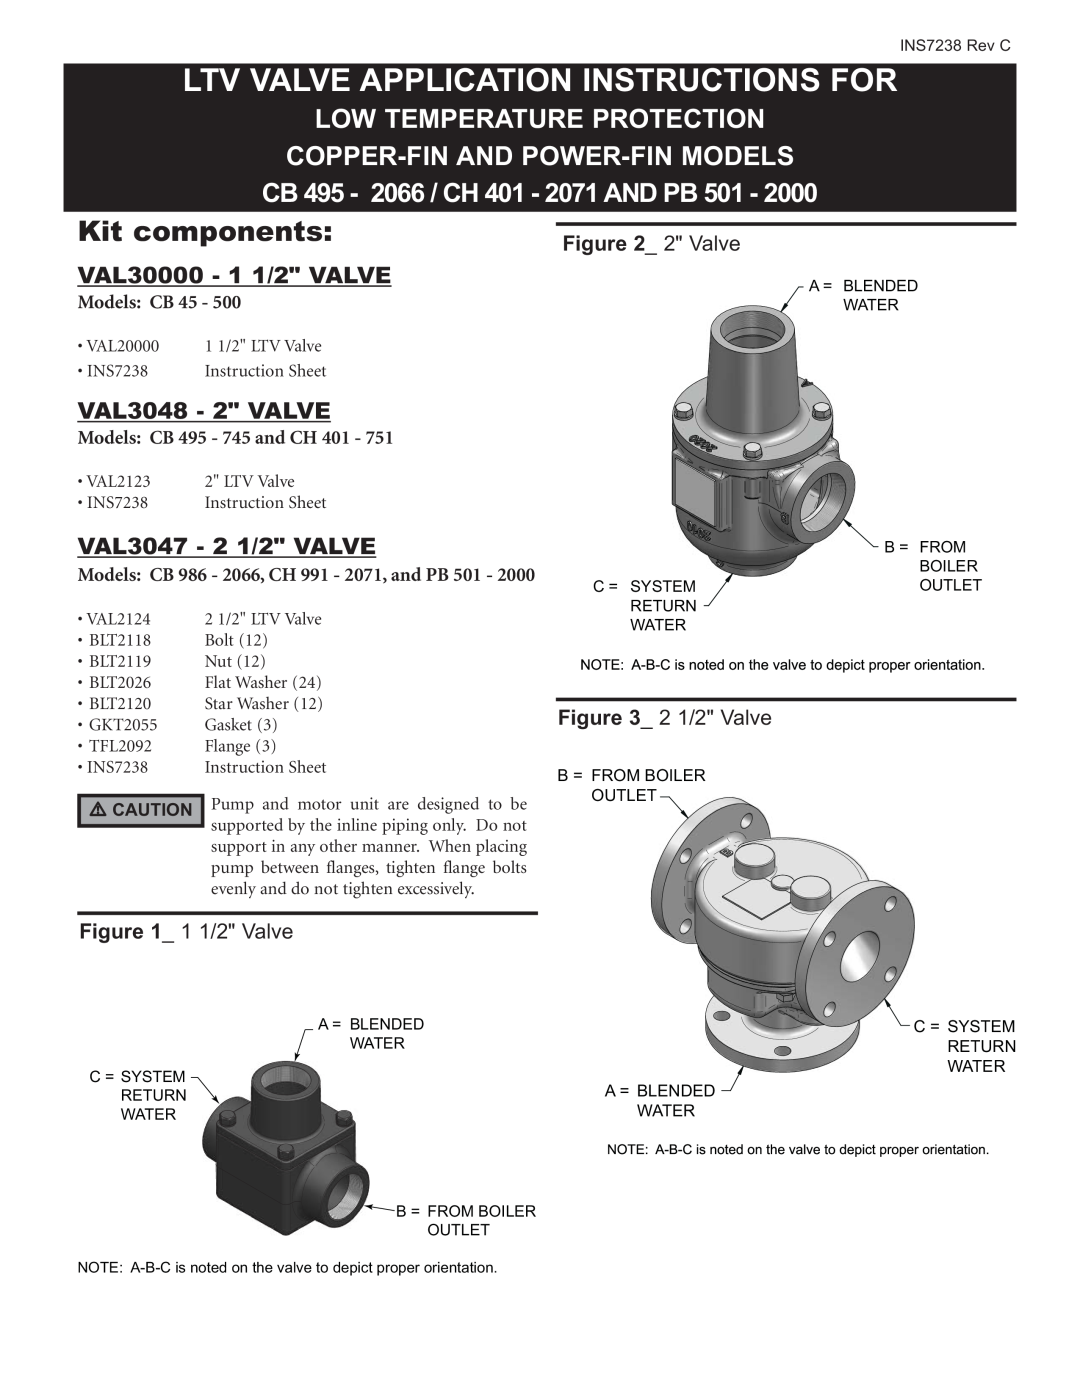 Lochinvar BLT2119 instruction sheet Kit components, Ltv Valve Application Instructions For, Low Temperature Protection 